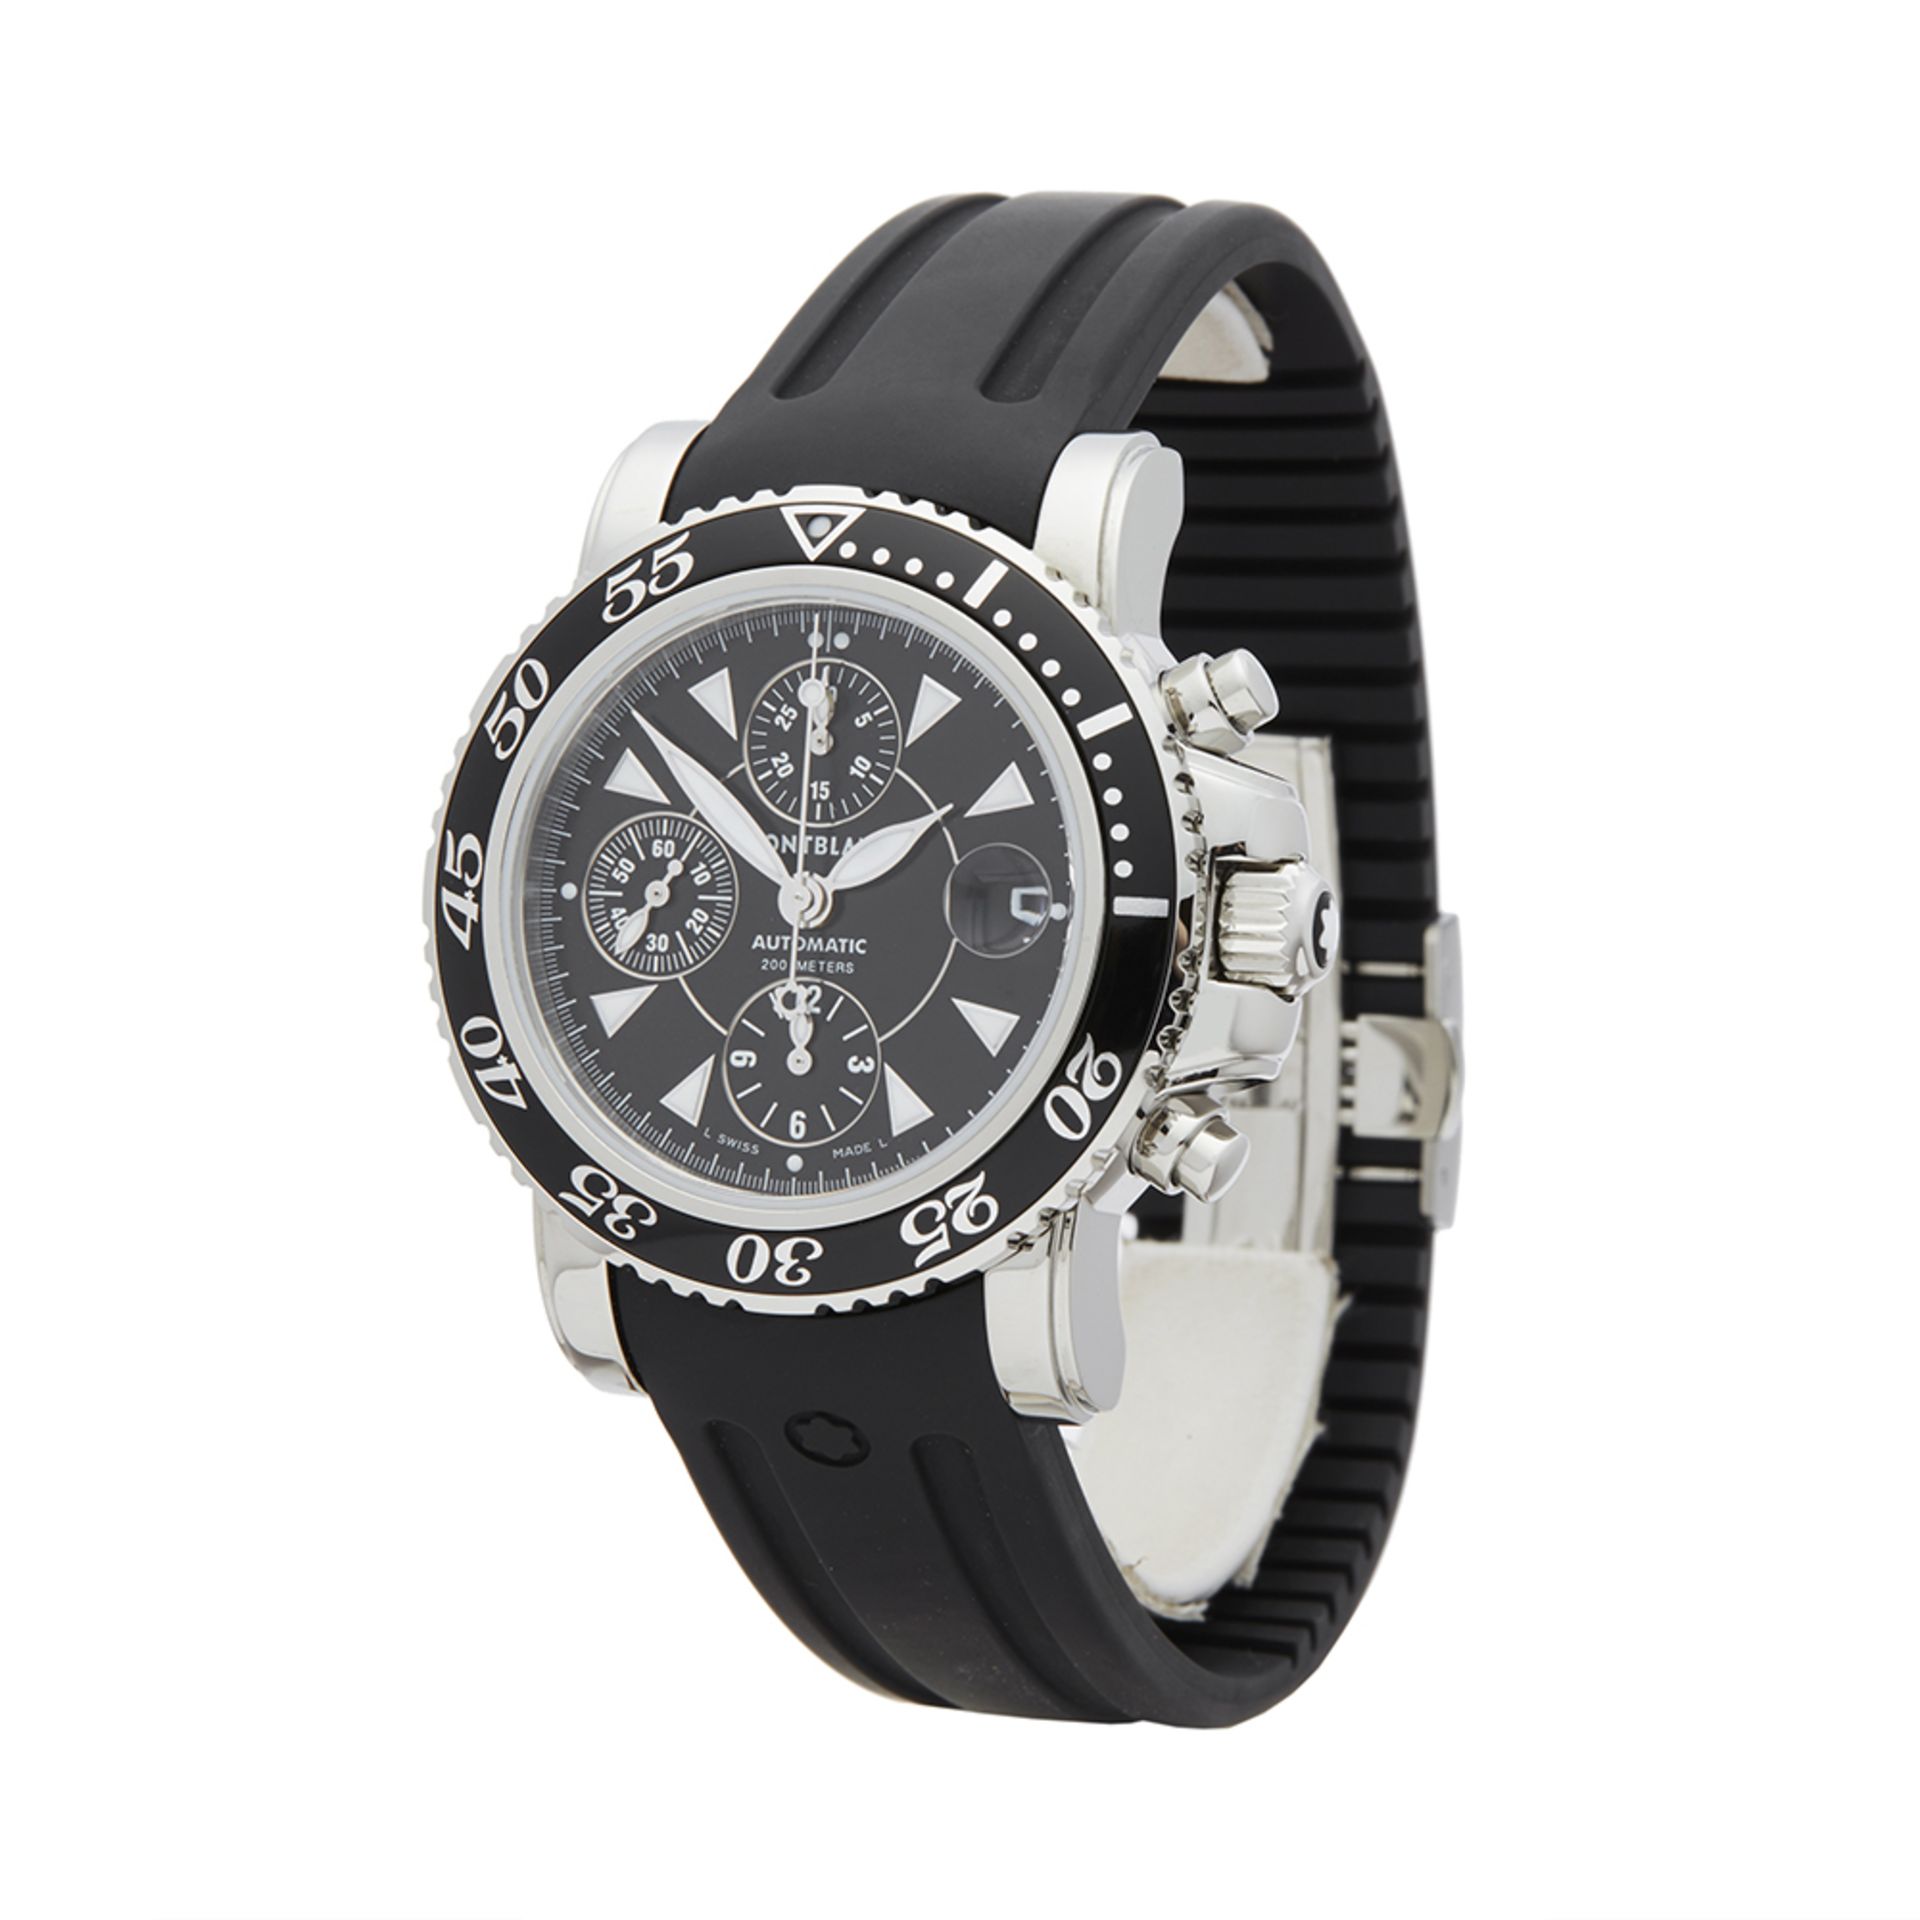 Montblanc Sport Chronograph 41mm Stainless Steel - 3274 - Image 3 of 8